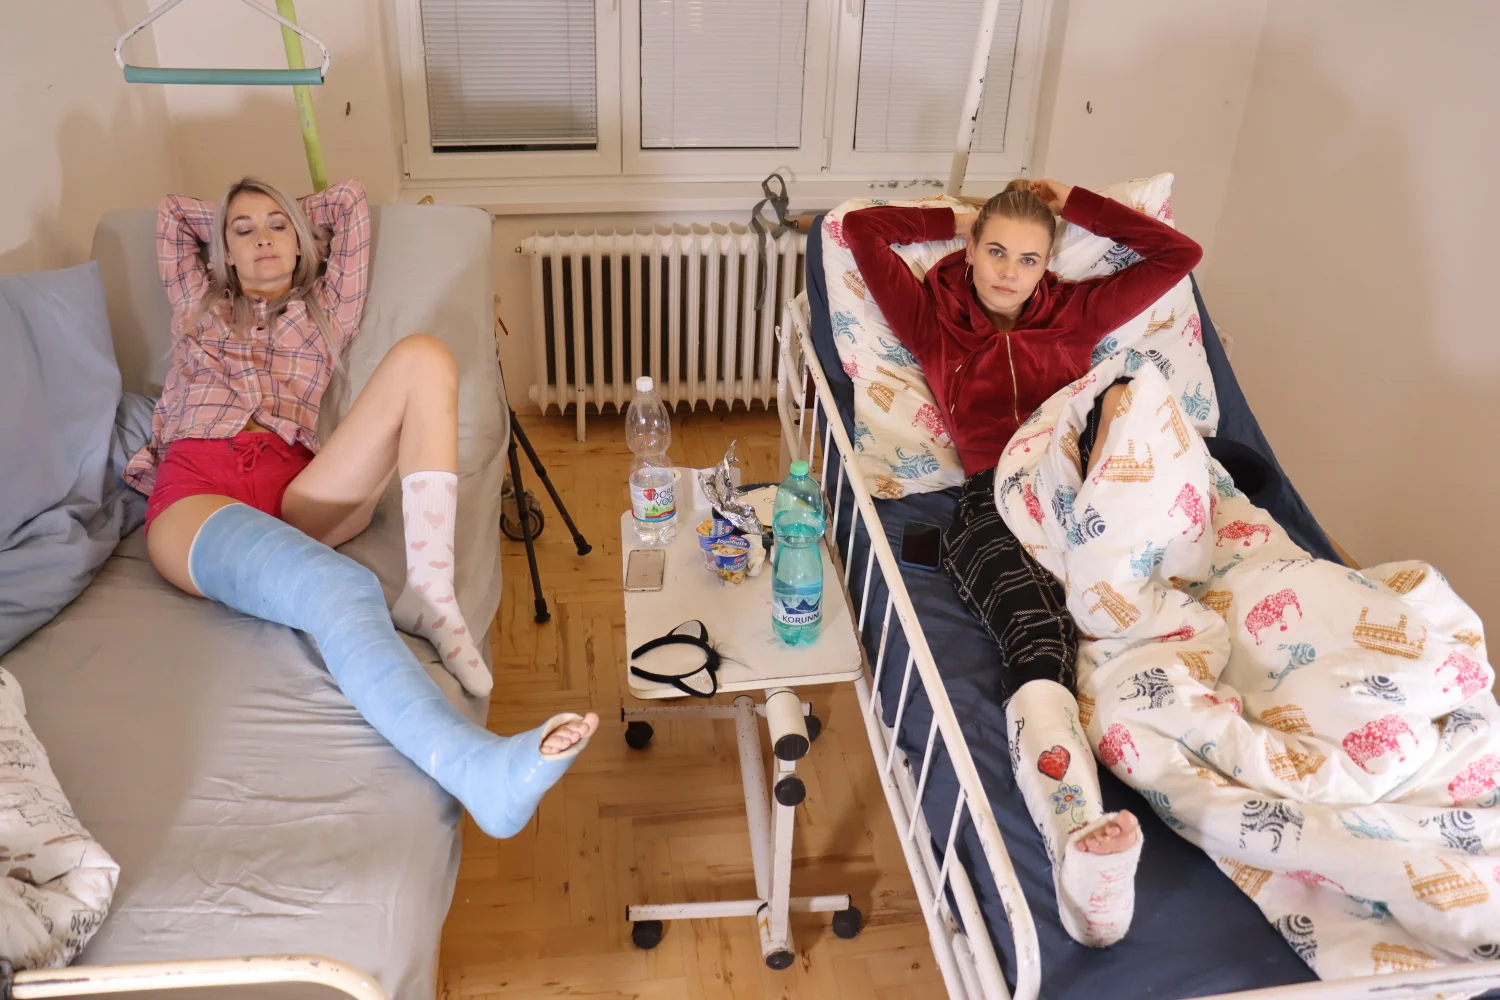 Zoe and Ellen ortho ward - Both girls were victims of a car accident. How this happened and what was the sequence of events leading up to their hospital stay, we will find out pretty soon from the video that will be released. Ellen broke her leg...